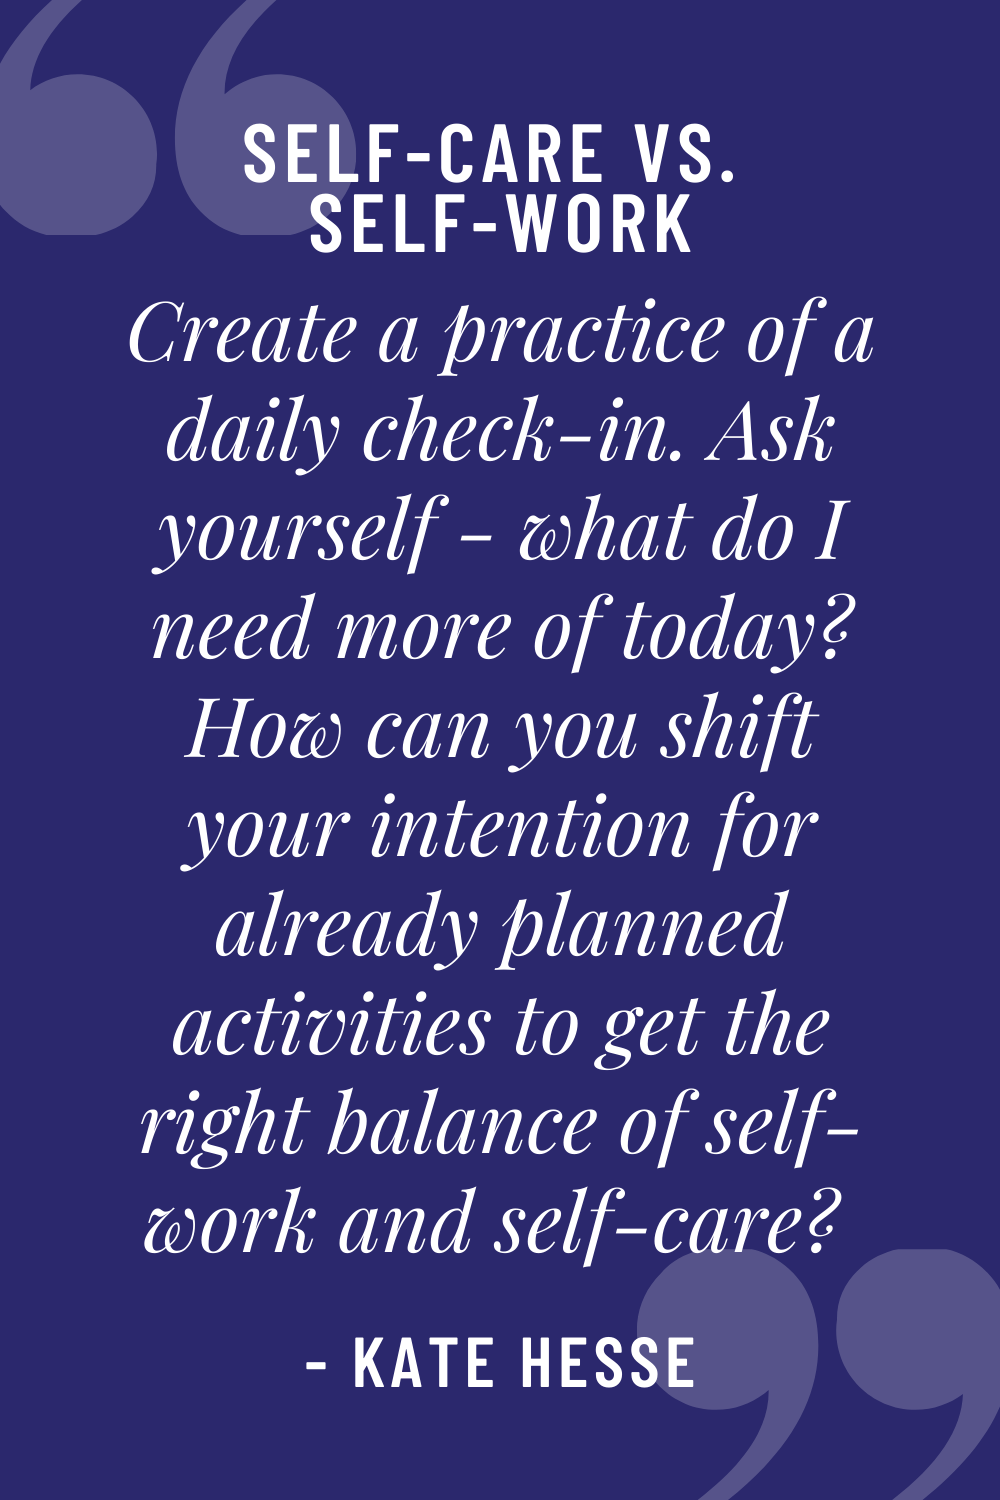 Create a practice of a daily check-in.  Ask yourself - what do I need more of today?  How can you shift your intention for already planned activities to get the right balance of self-work and self-care?